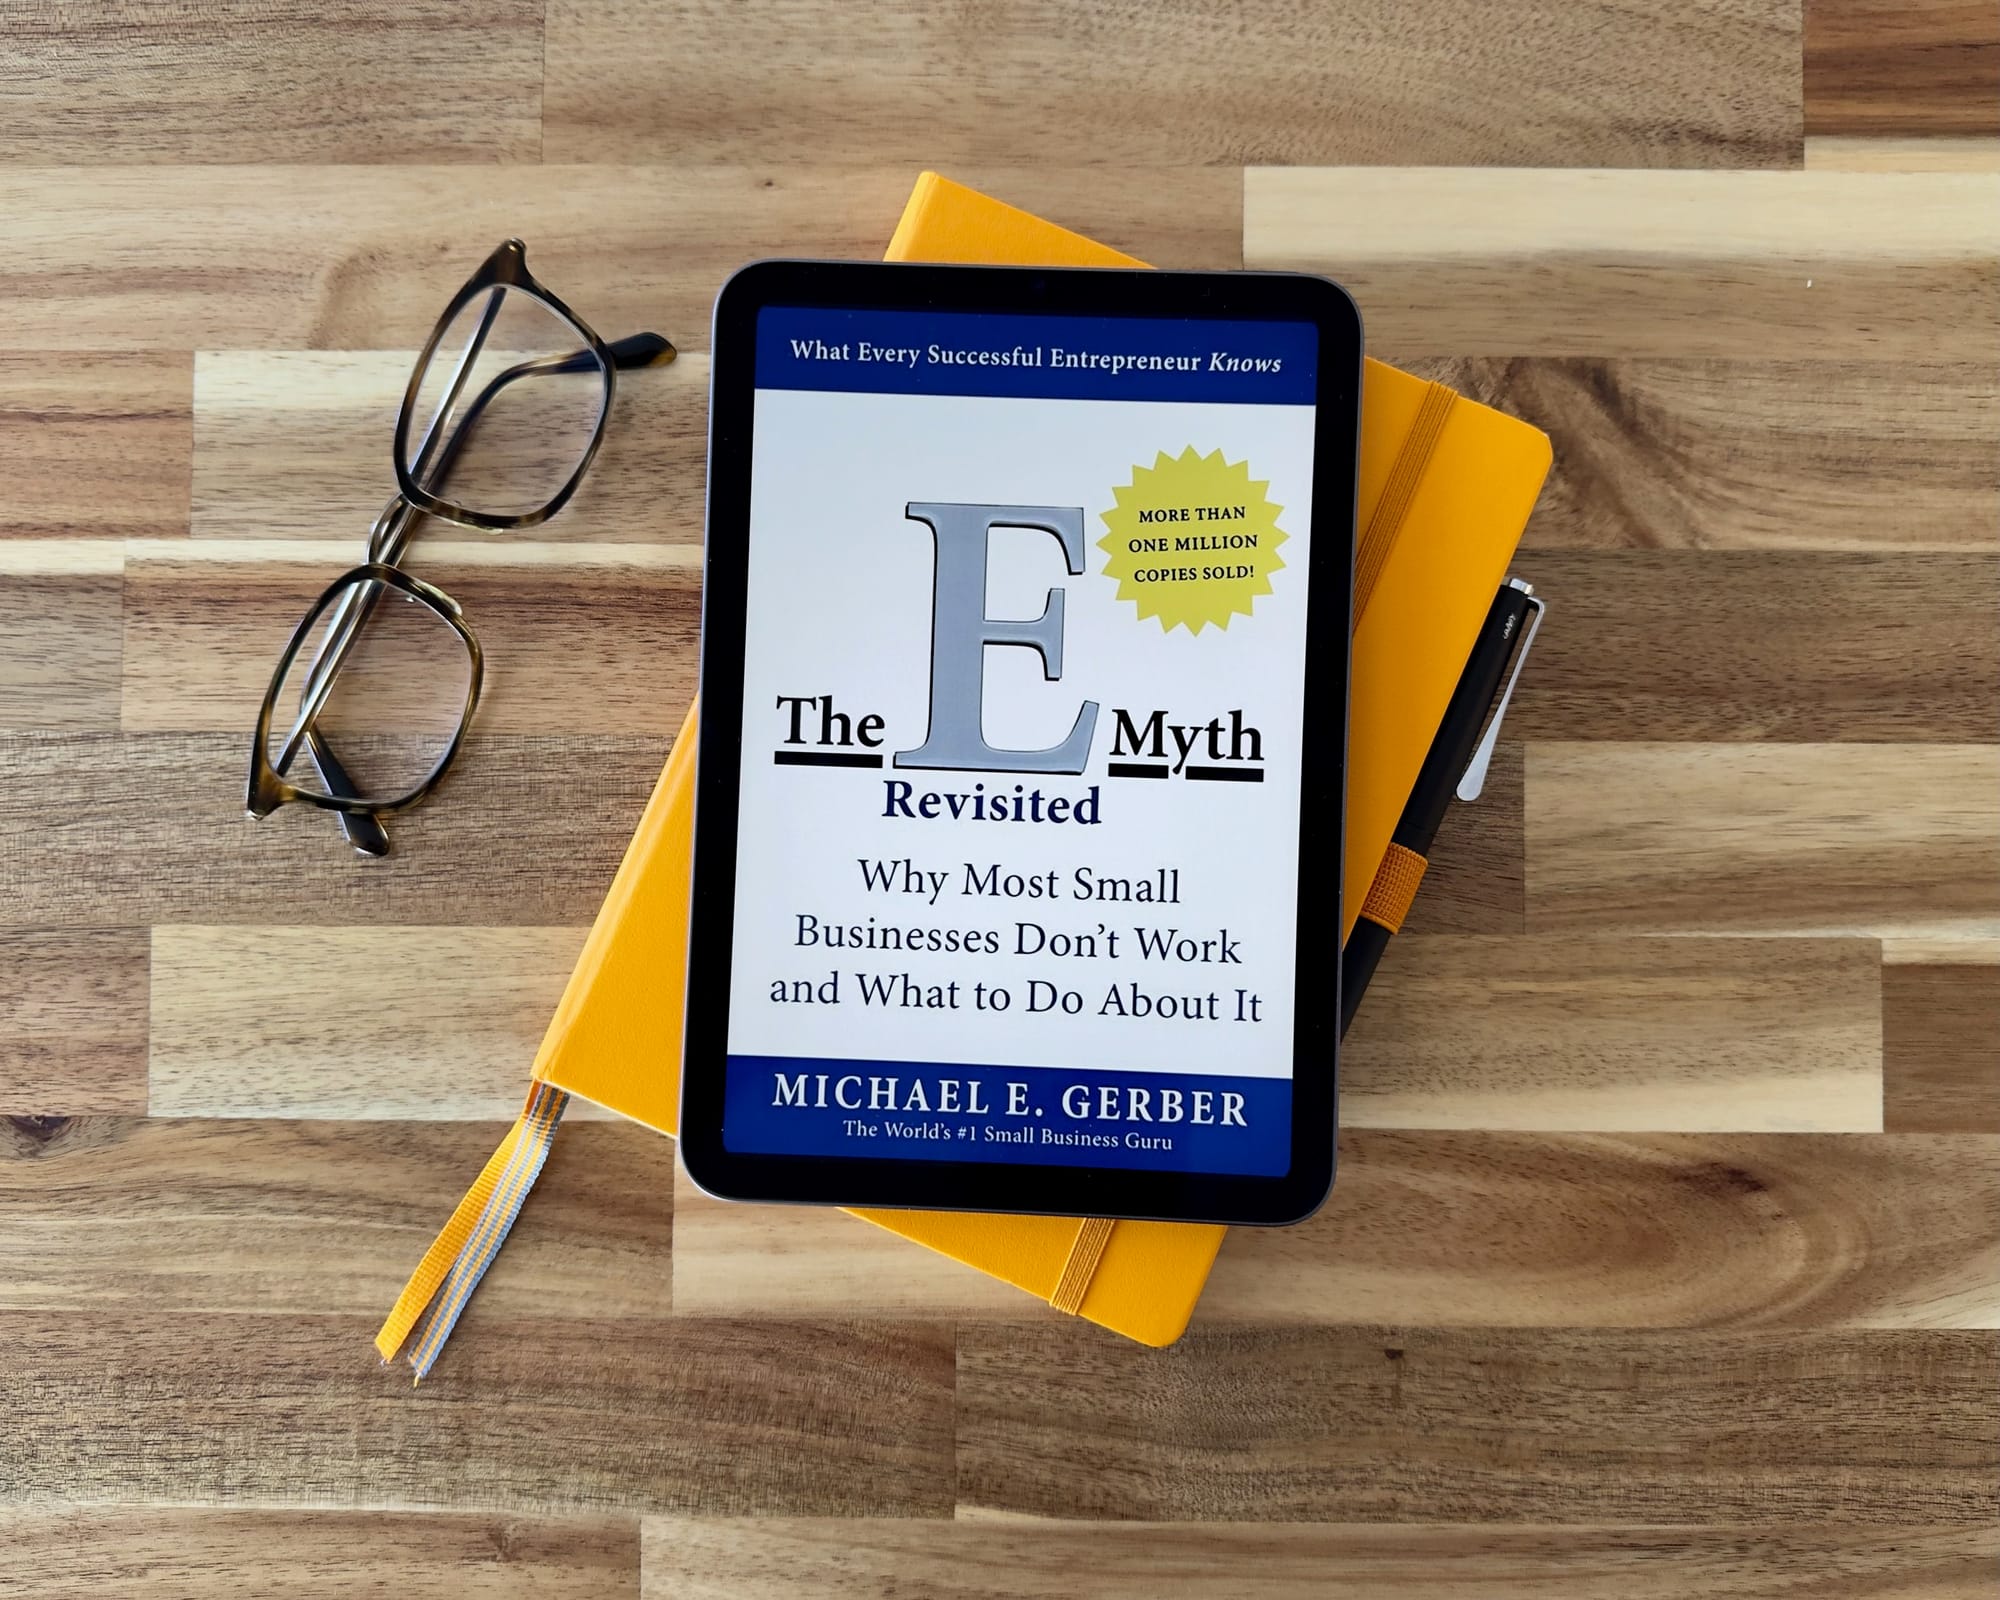 Book Review: The E-Myth Revisited by Michael E. Gerber